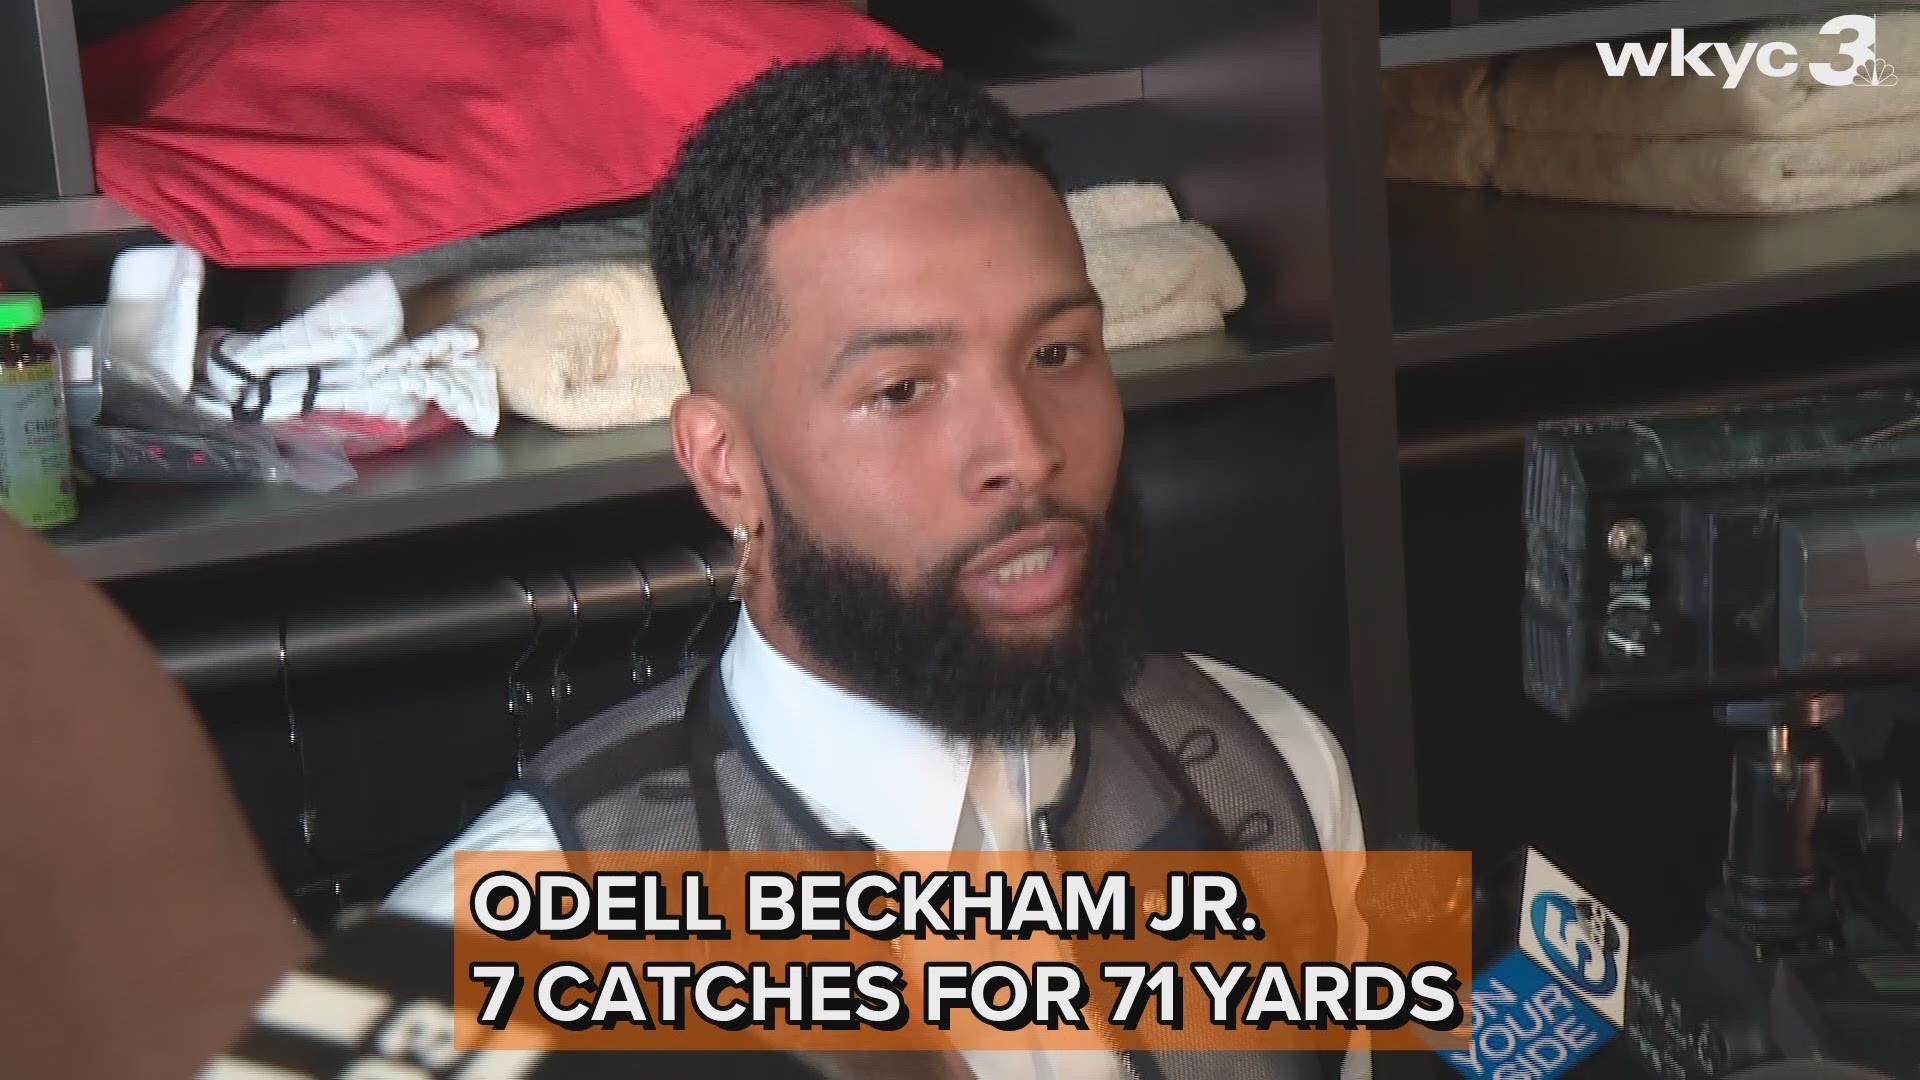 Following his team's loss to the Tennessee Titans, Cleveland Browns wide receiver Odell Beckham Jr. said he wishes fans wouldn't have left the stadium early.